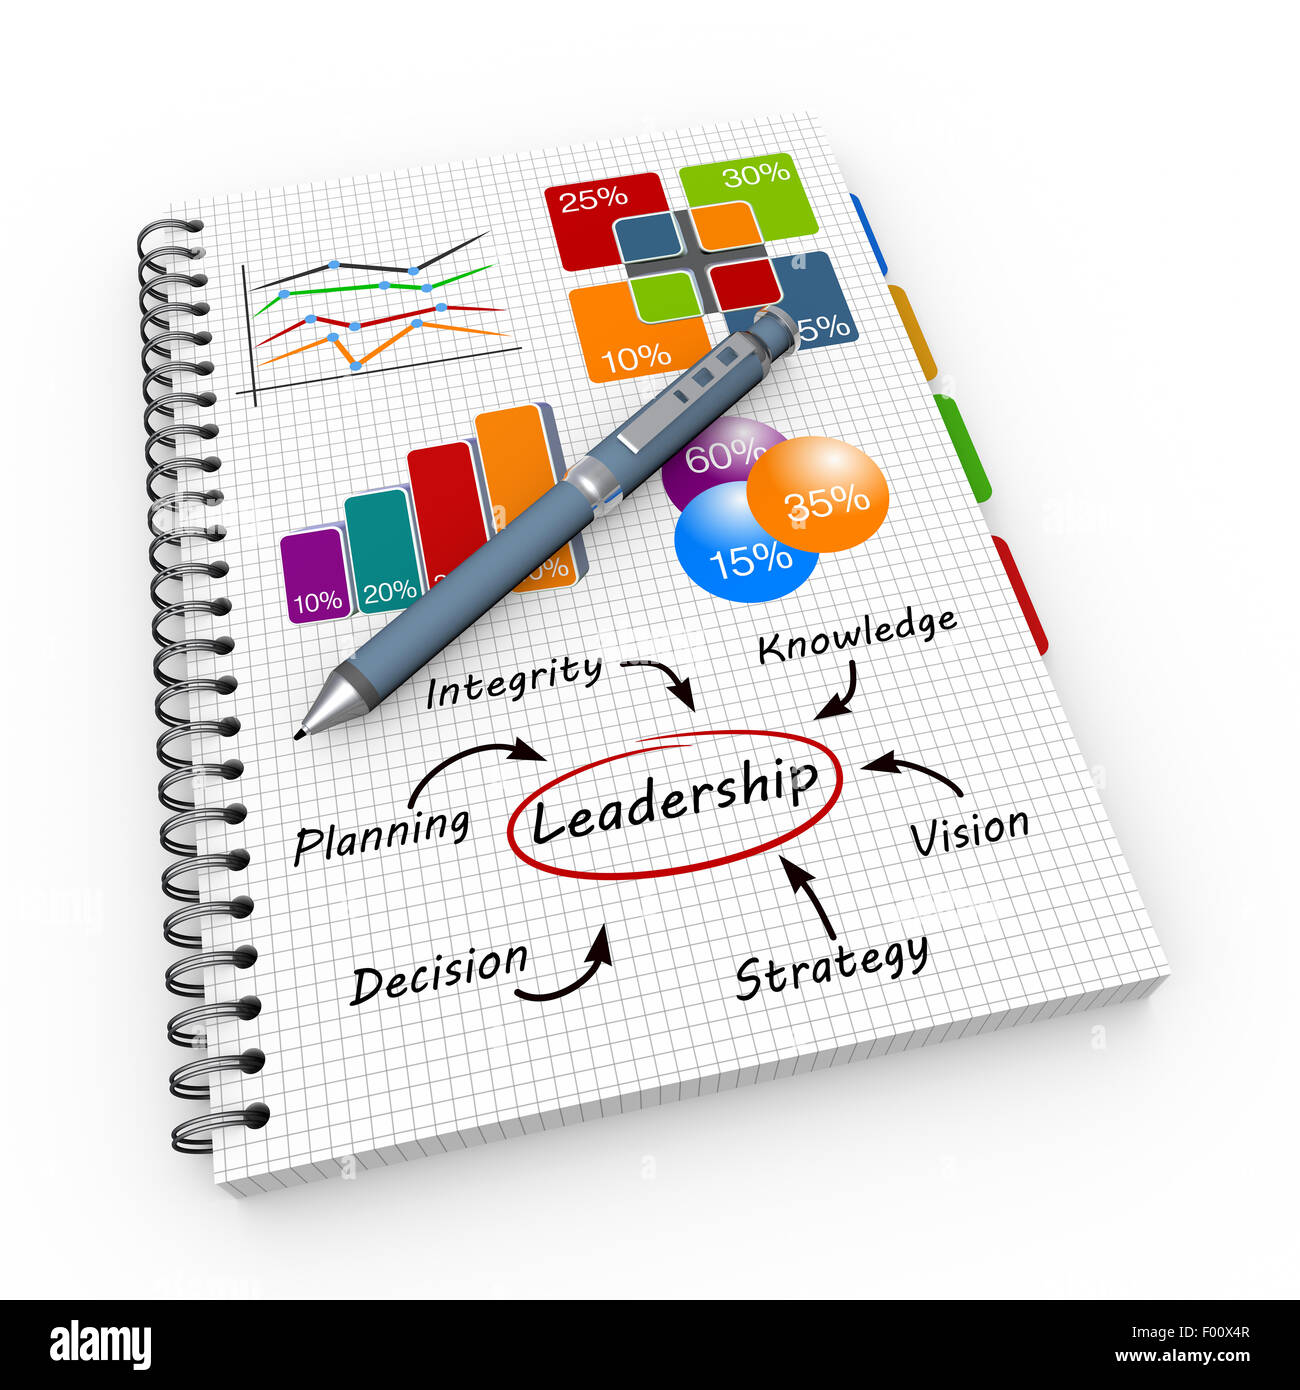 Leadership concept illustration design over a notebook Stock Photo